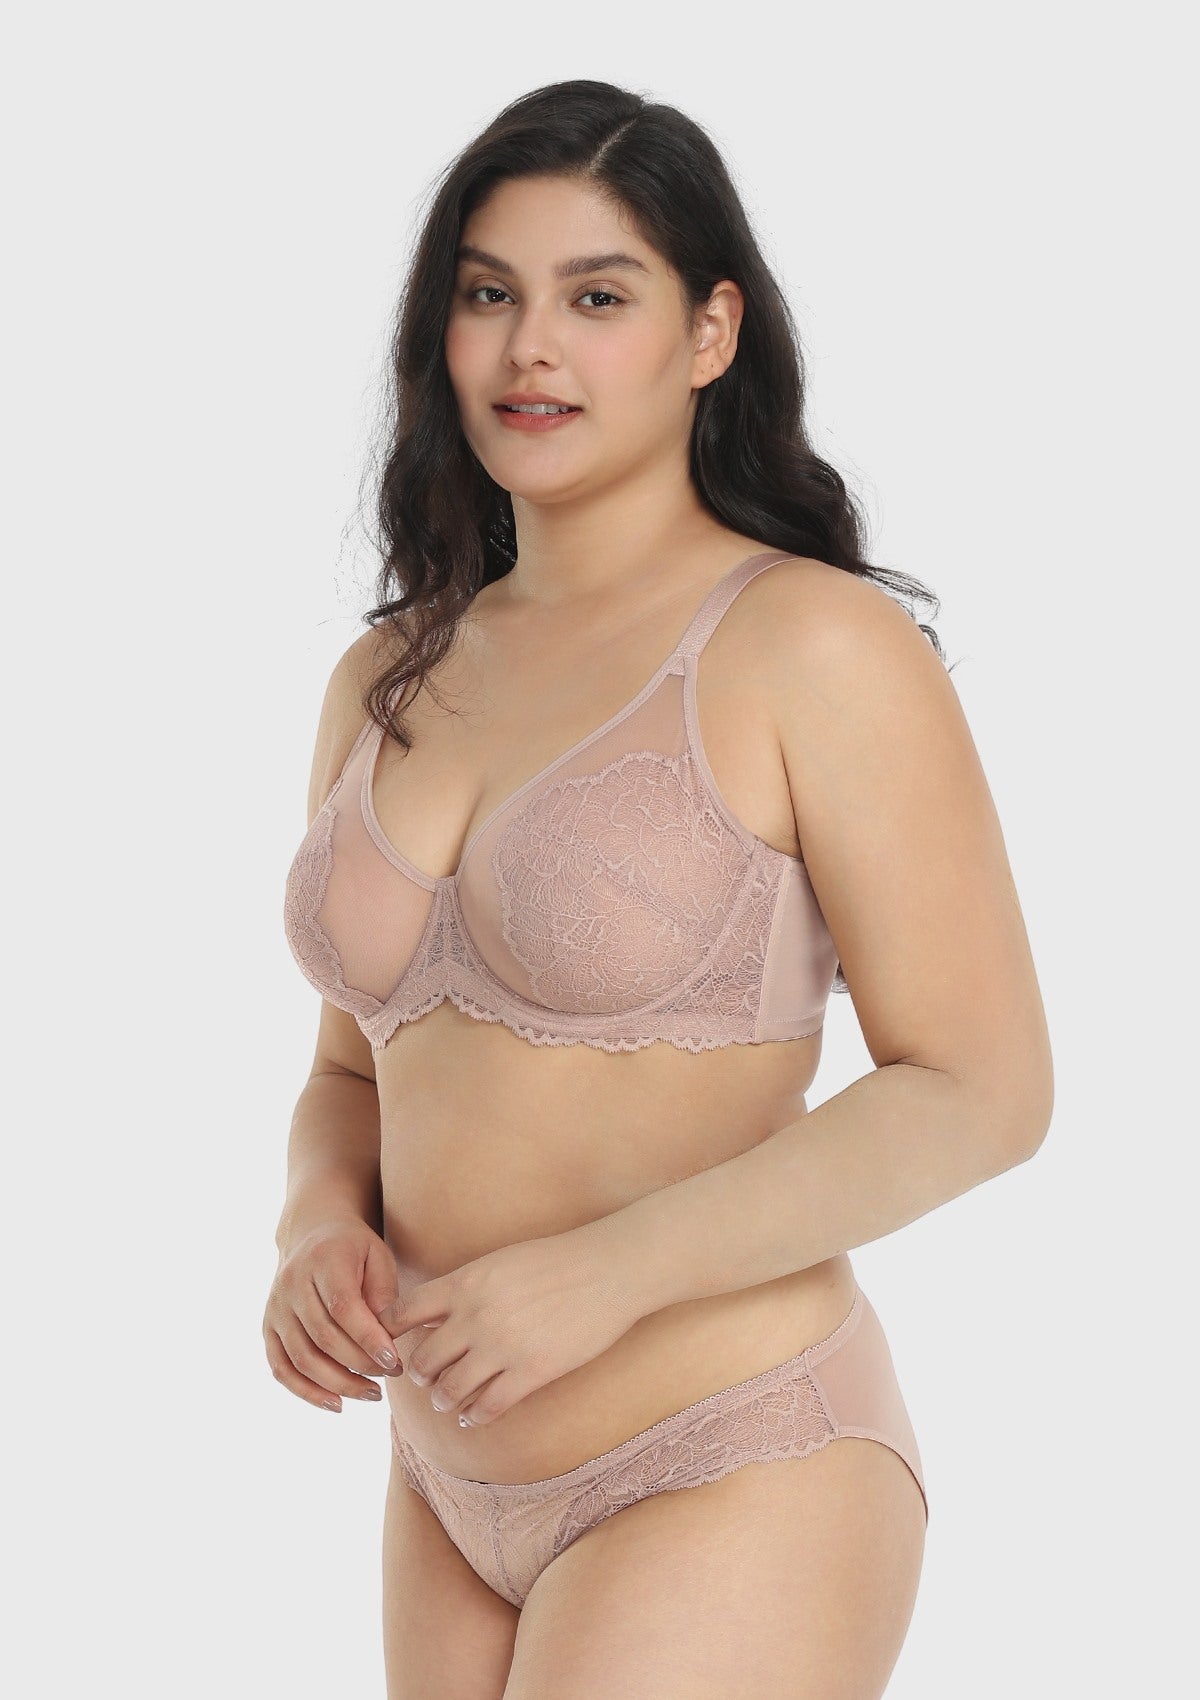 HSIA Blossom Plus Size Lace Bra - Wired, Unpadded, See-Through - Dark Pink / 42 / H